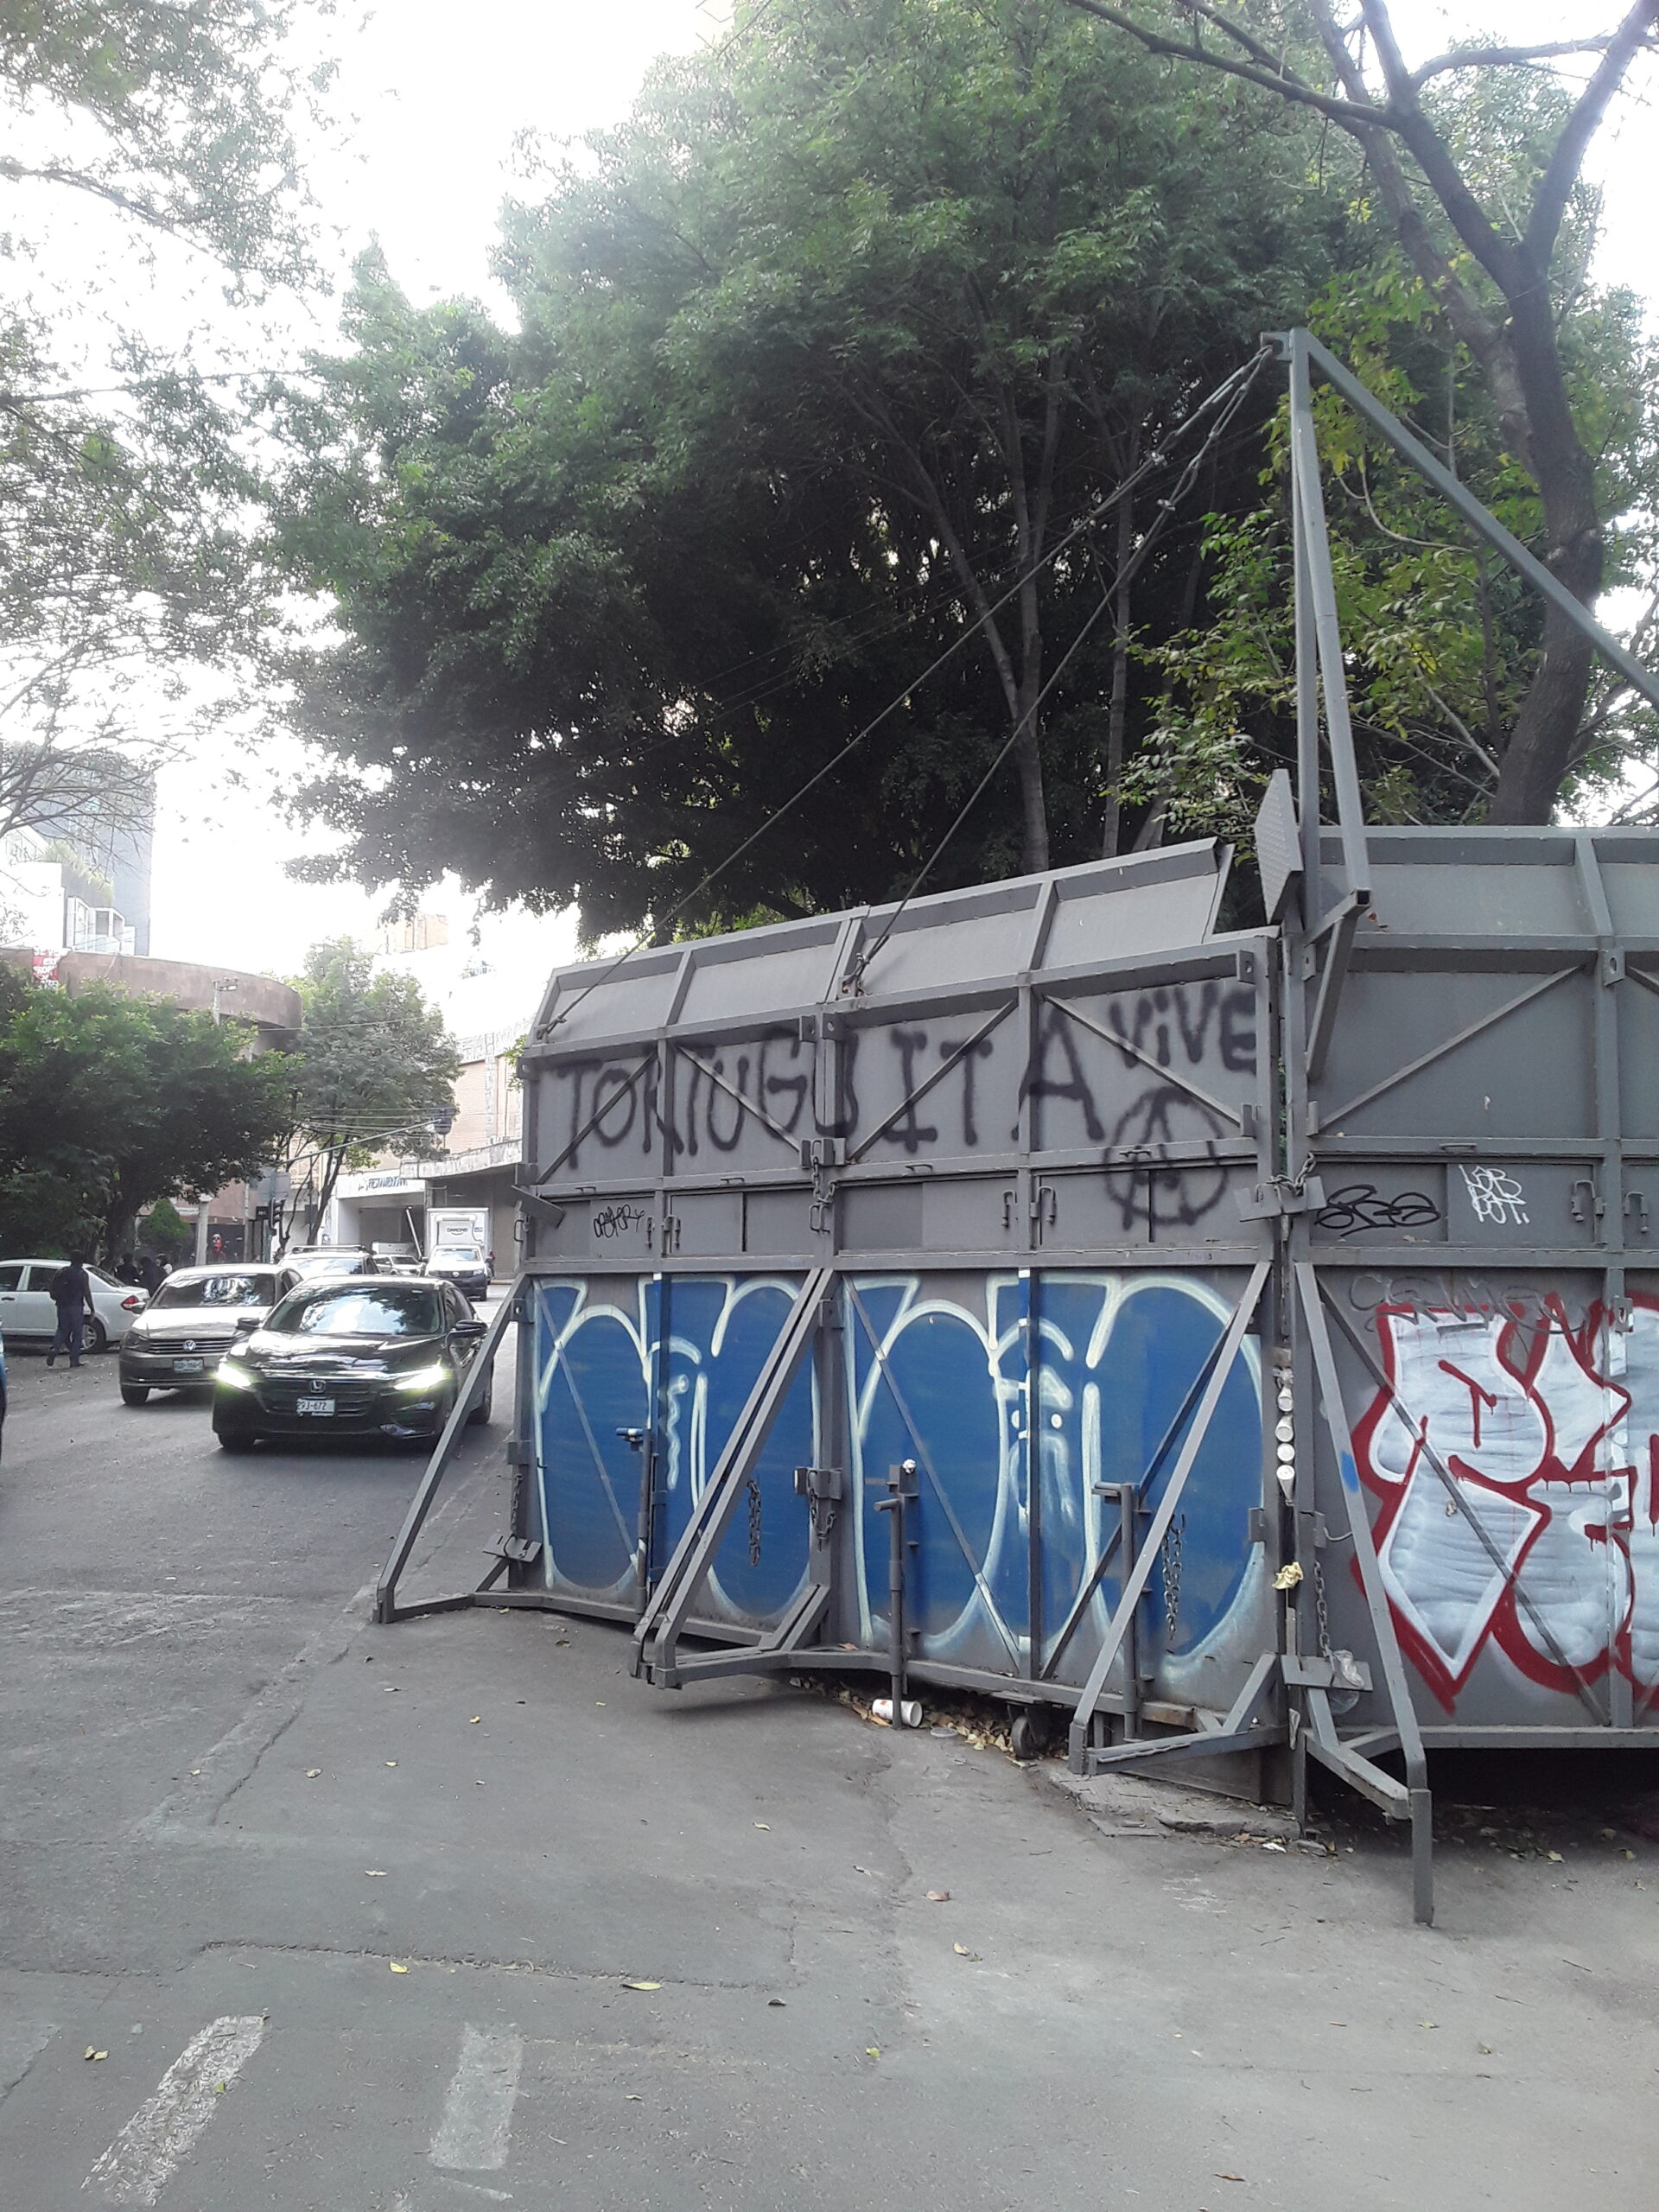 On a gray barricade in a busy city street, "TORTUGUITAN VIVE" is tagged next to an anarchist circle-A symbol and above two other unrelated tags in black spray paint.